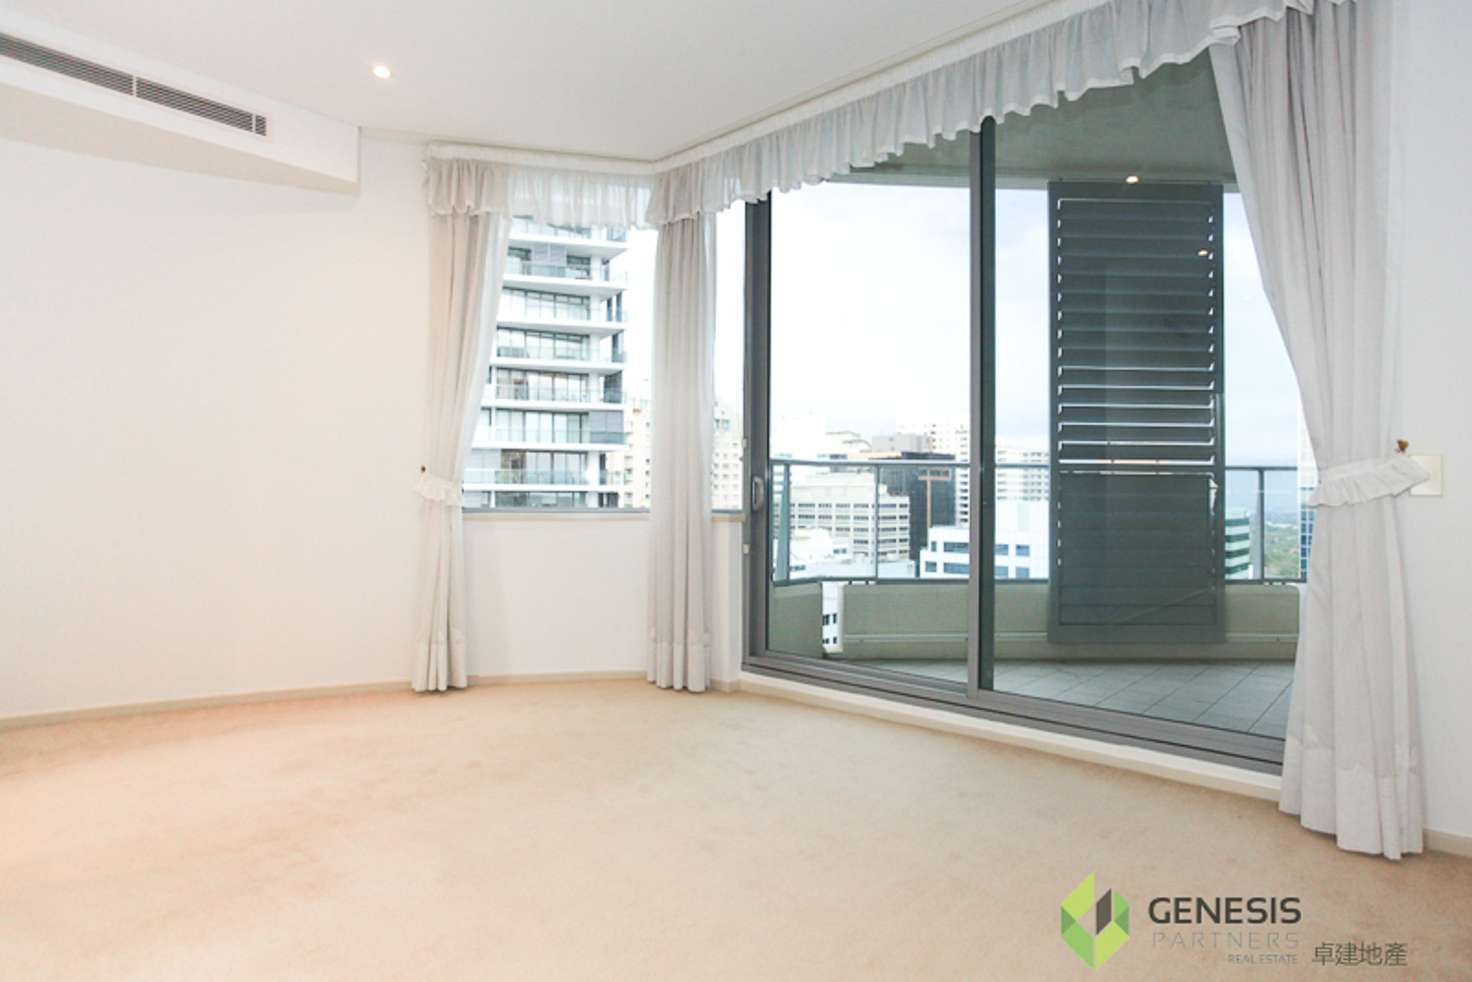 Main view of Homely apartment listing, 1403/9 Railway Street, Chatswood NSW 2067